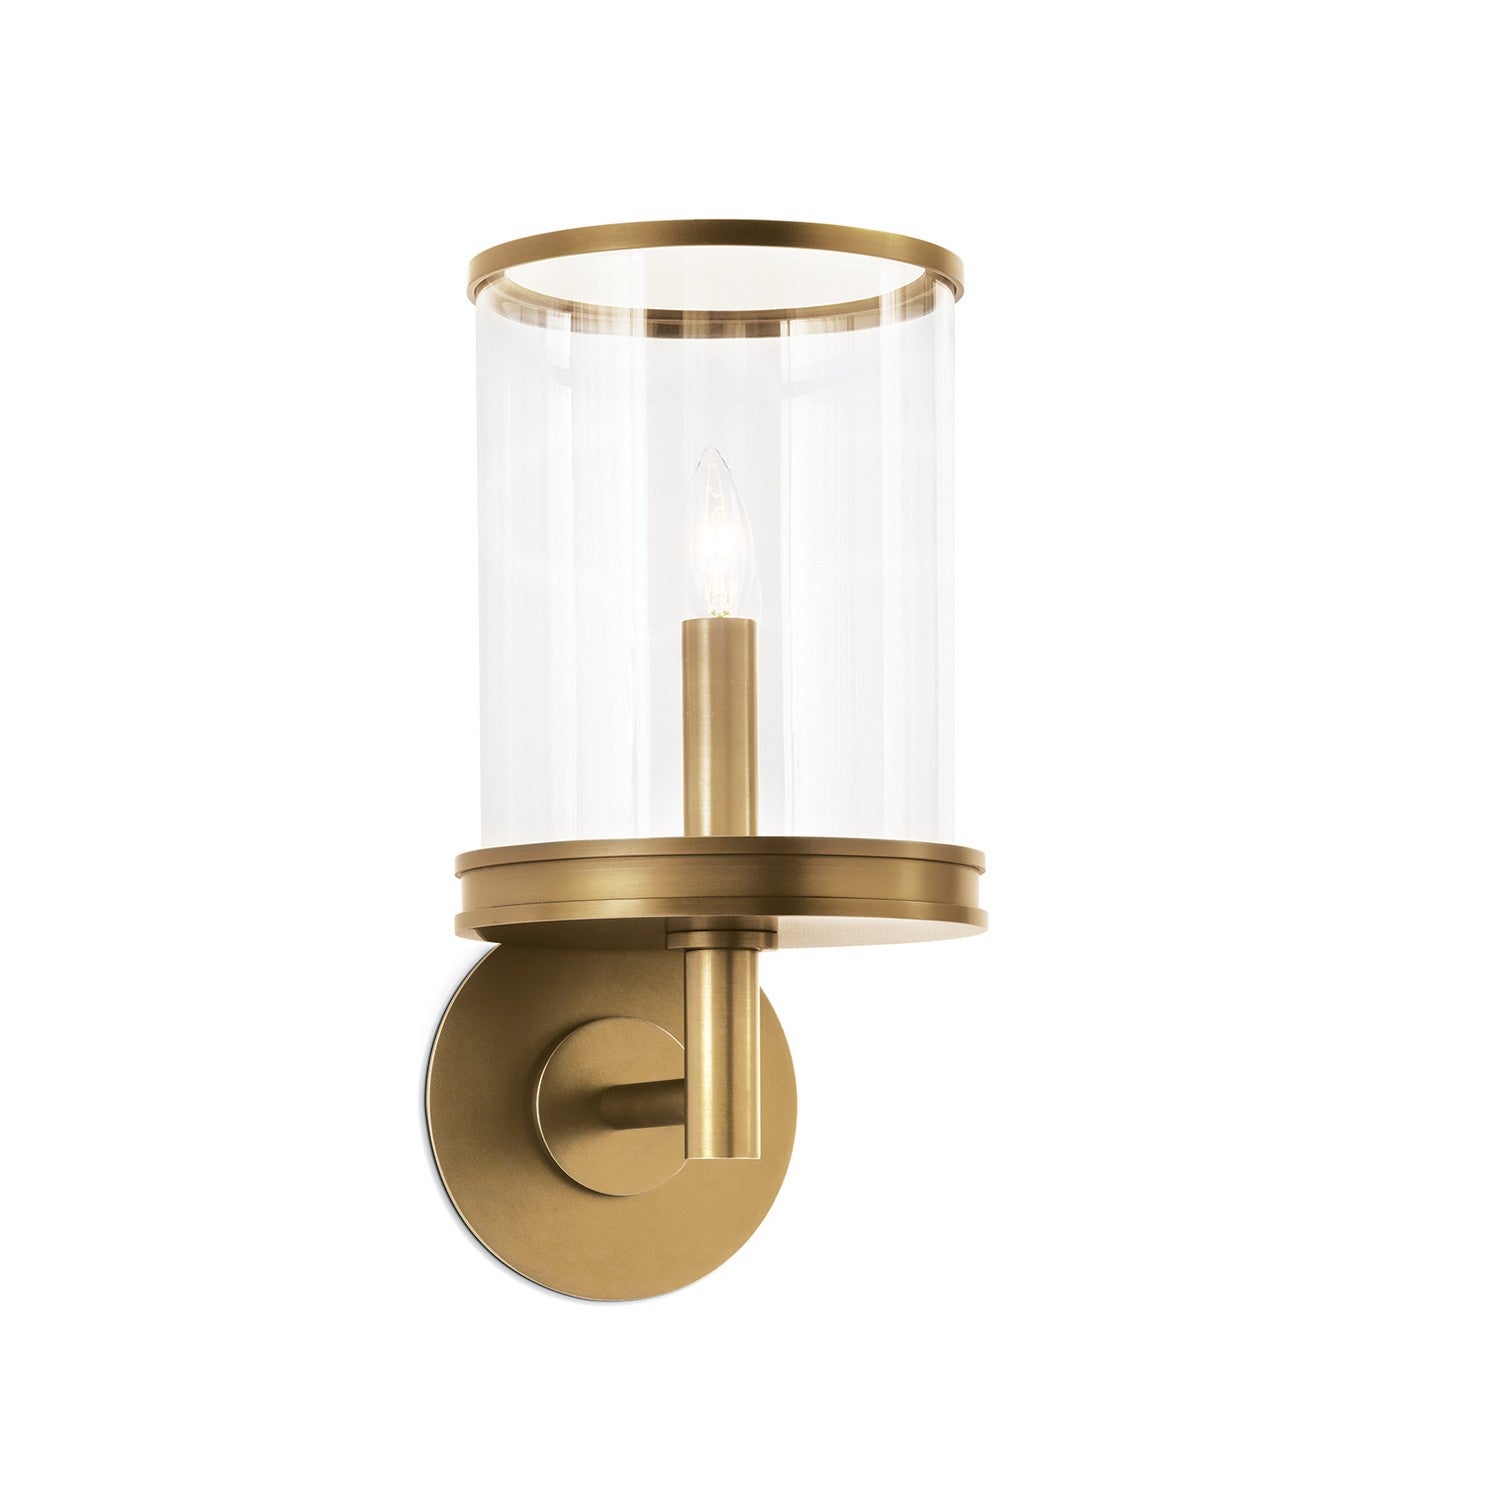 Regina Andrew - 15-1207NB - One Light Wall Sconce - Adria - Natural Brass